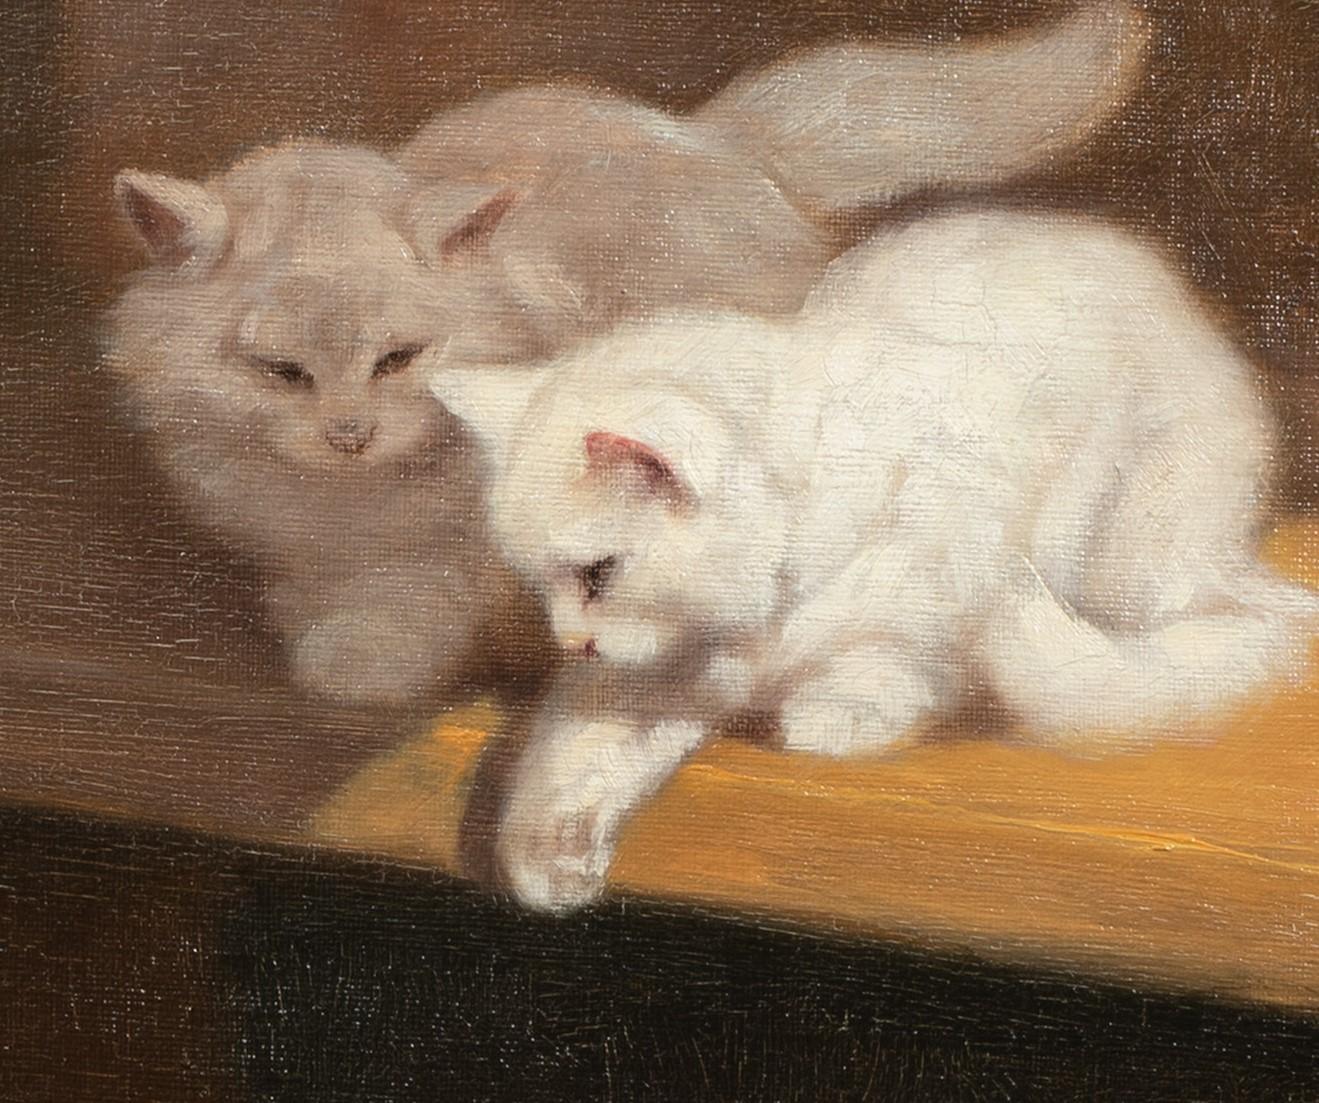 The Curious Observers, 19th Century 

by Arthur HEYER (1872-1931) similar to $15,000

Large 19th Century Scene of two Angora Cats watching a sleeping Bulldog, oil on canvas by Arthur Heyer. Excellent quality and condition example of the famous